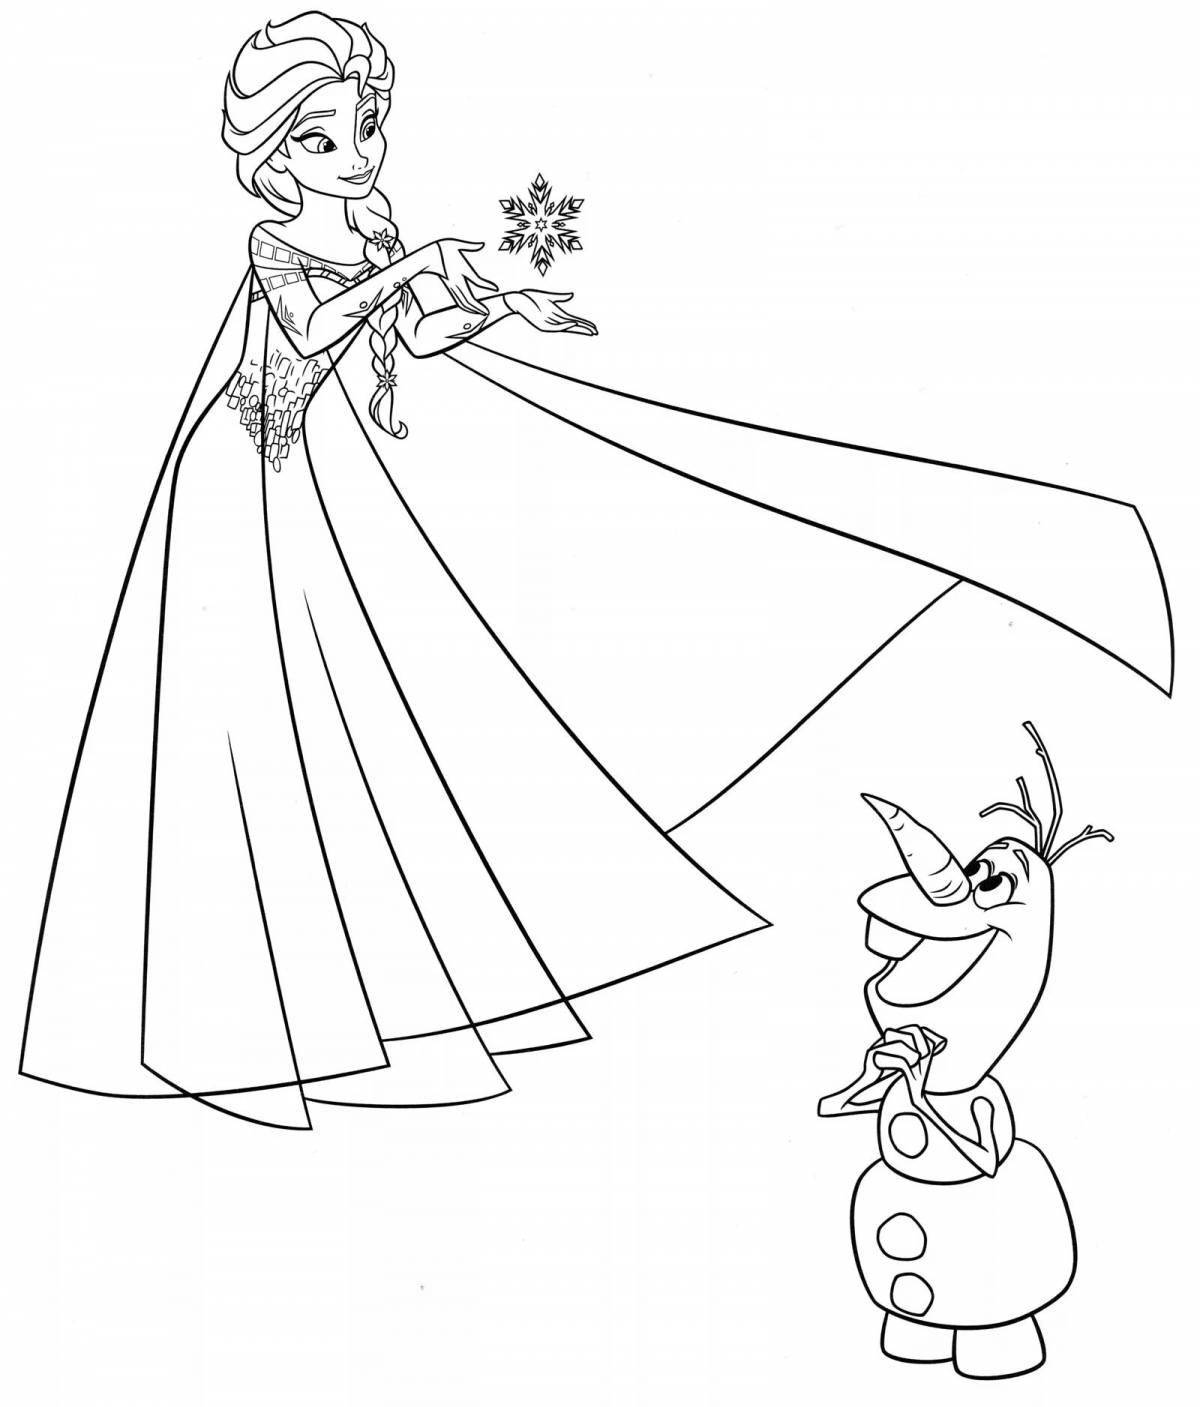 Radiant coloring page олов и эльза